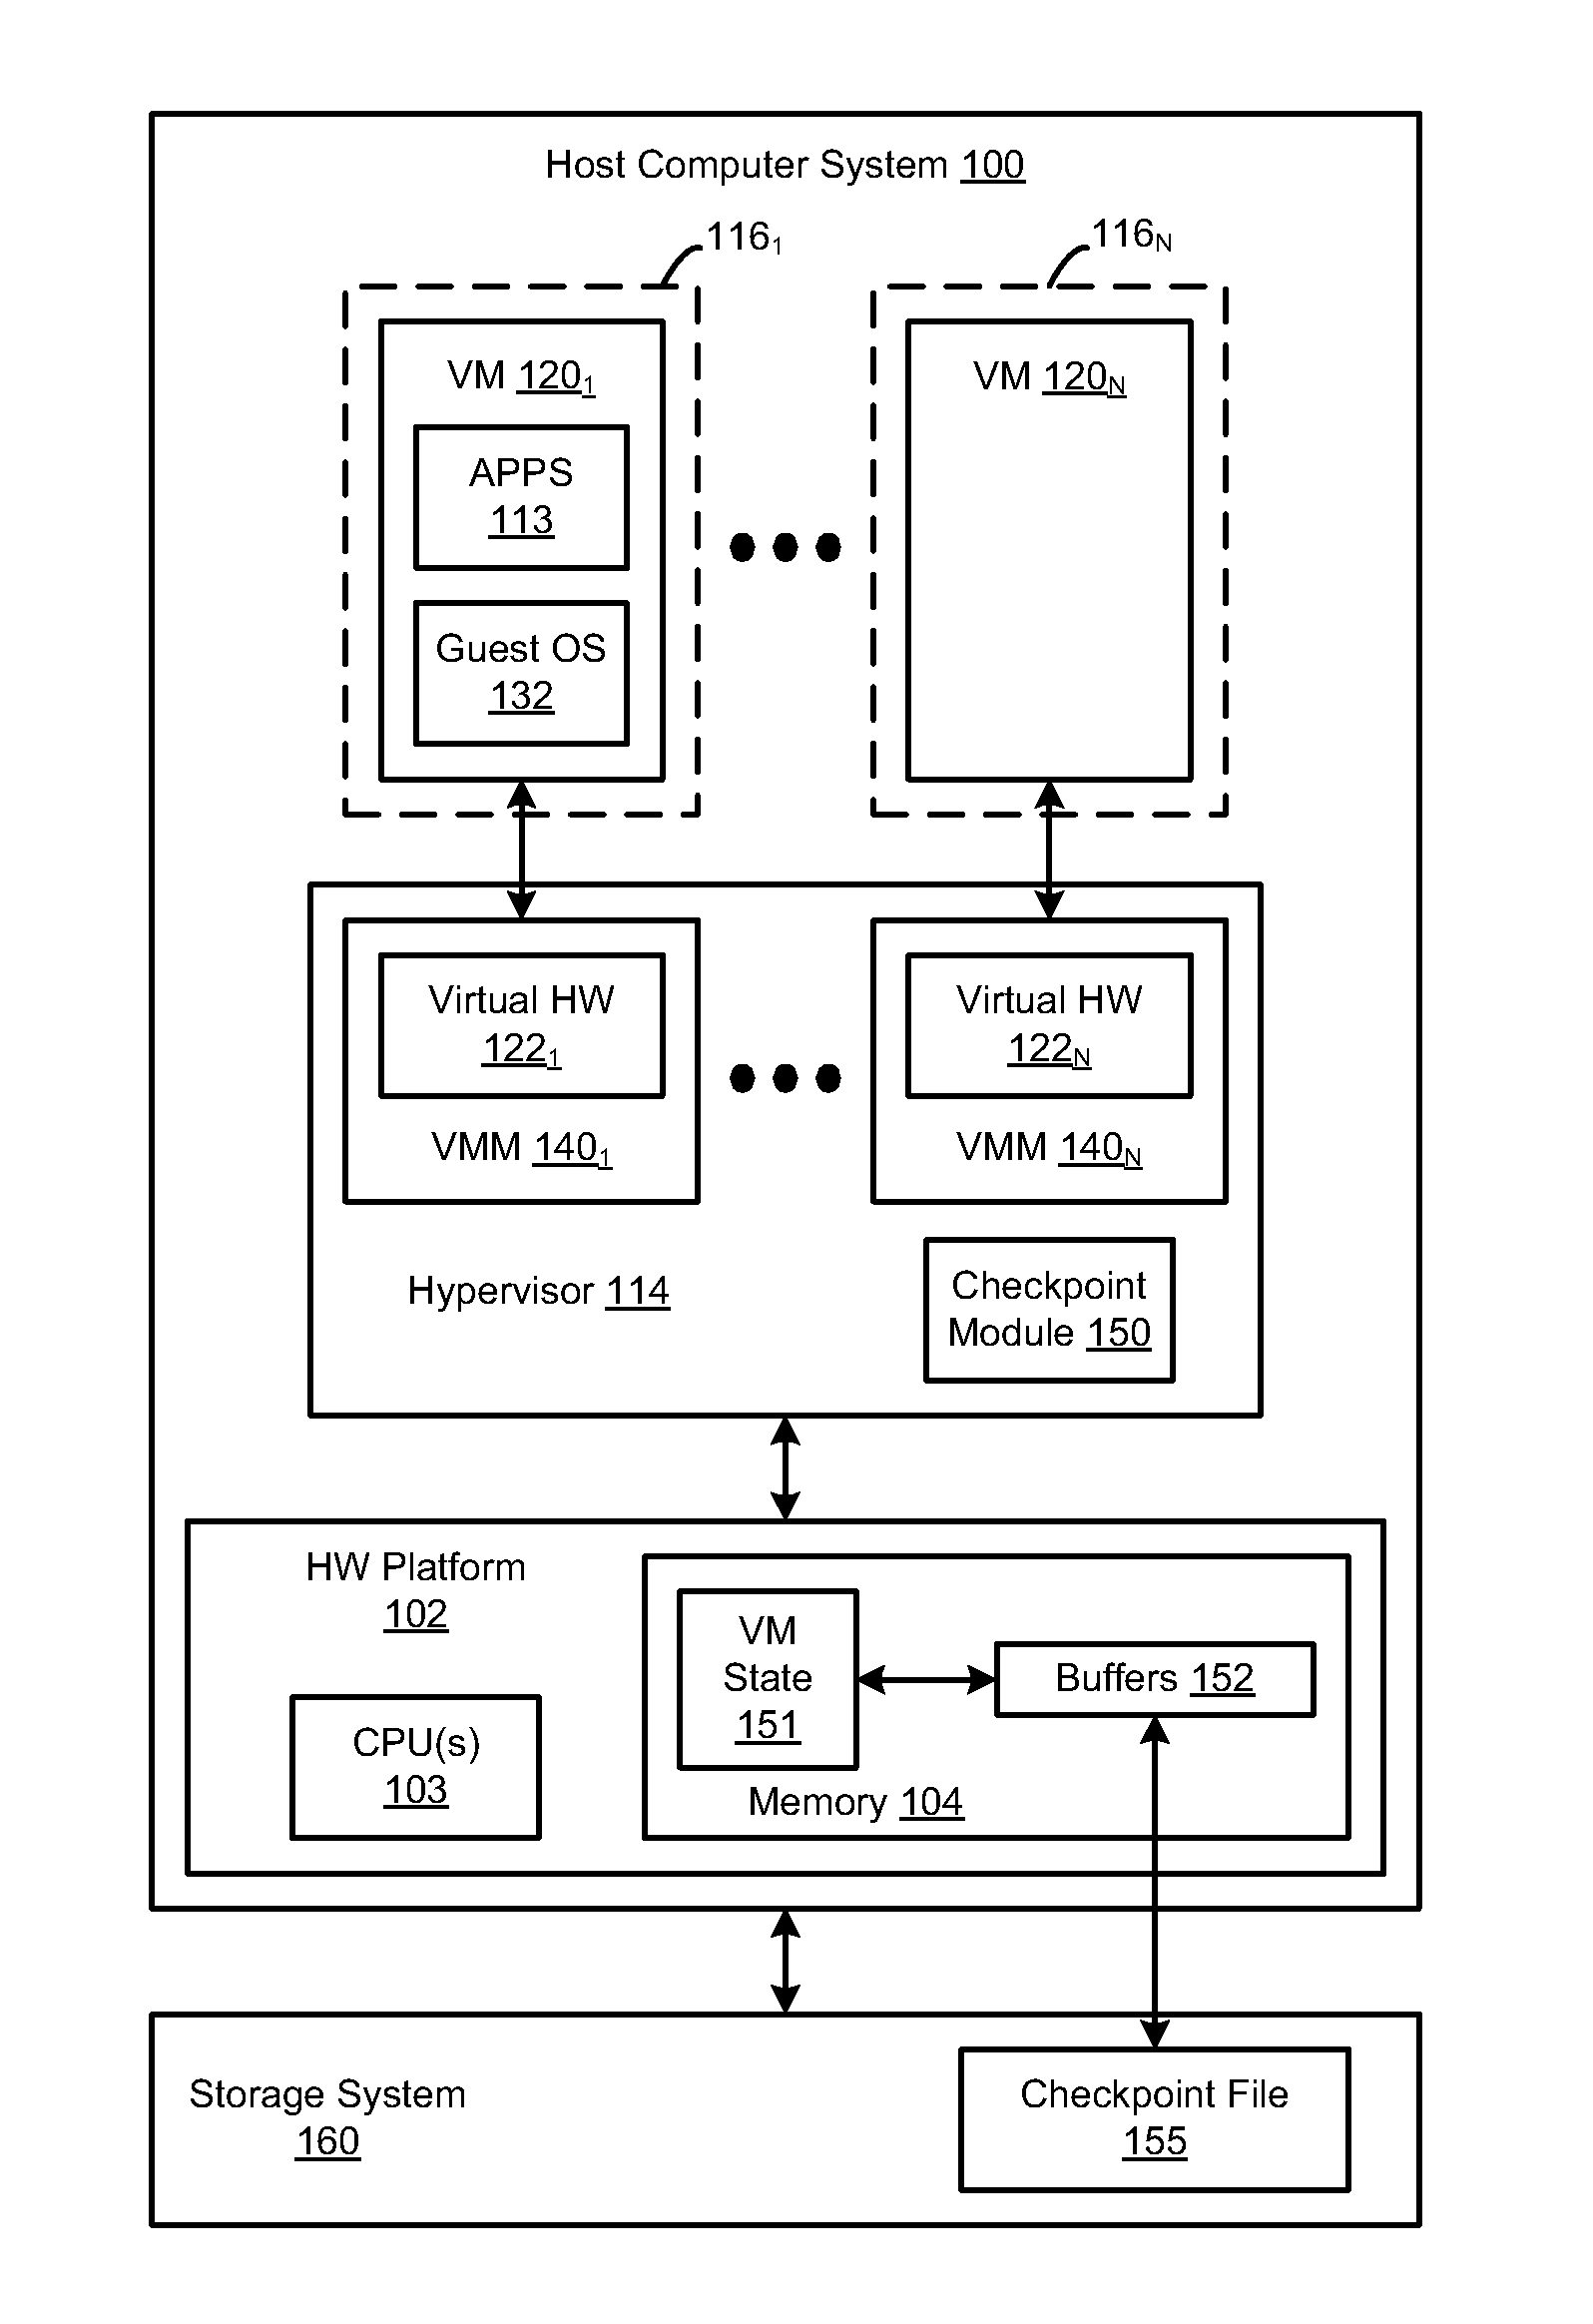 Method for saving virtual machine state to a checkpoint file